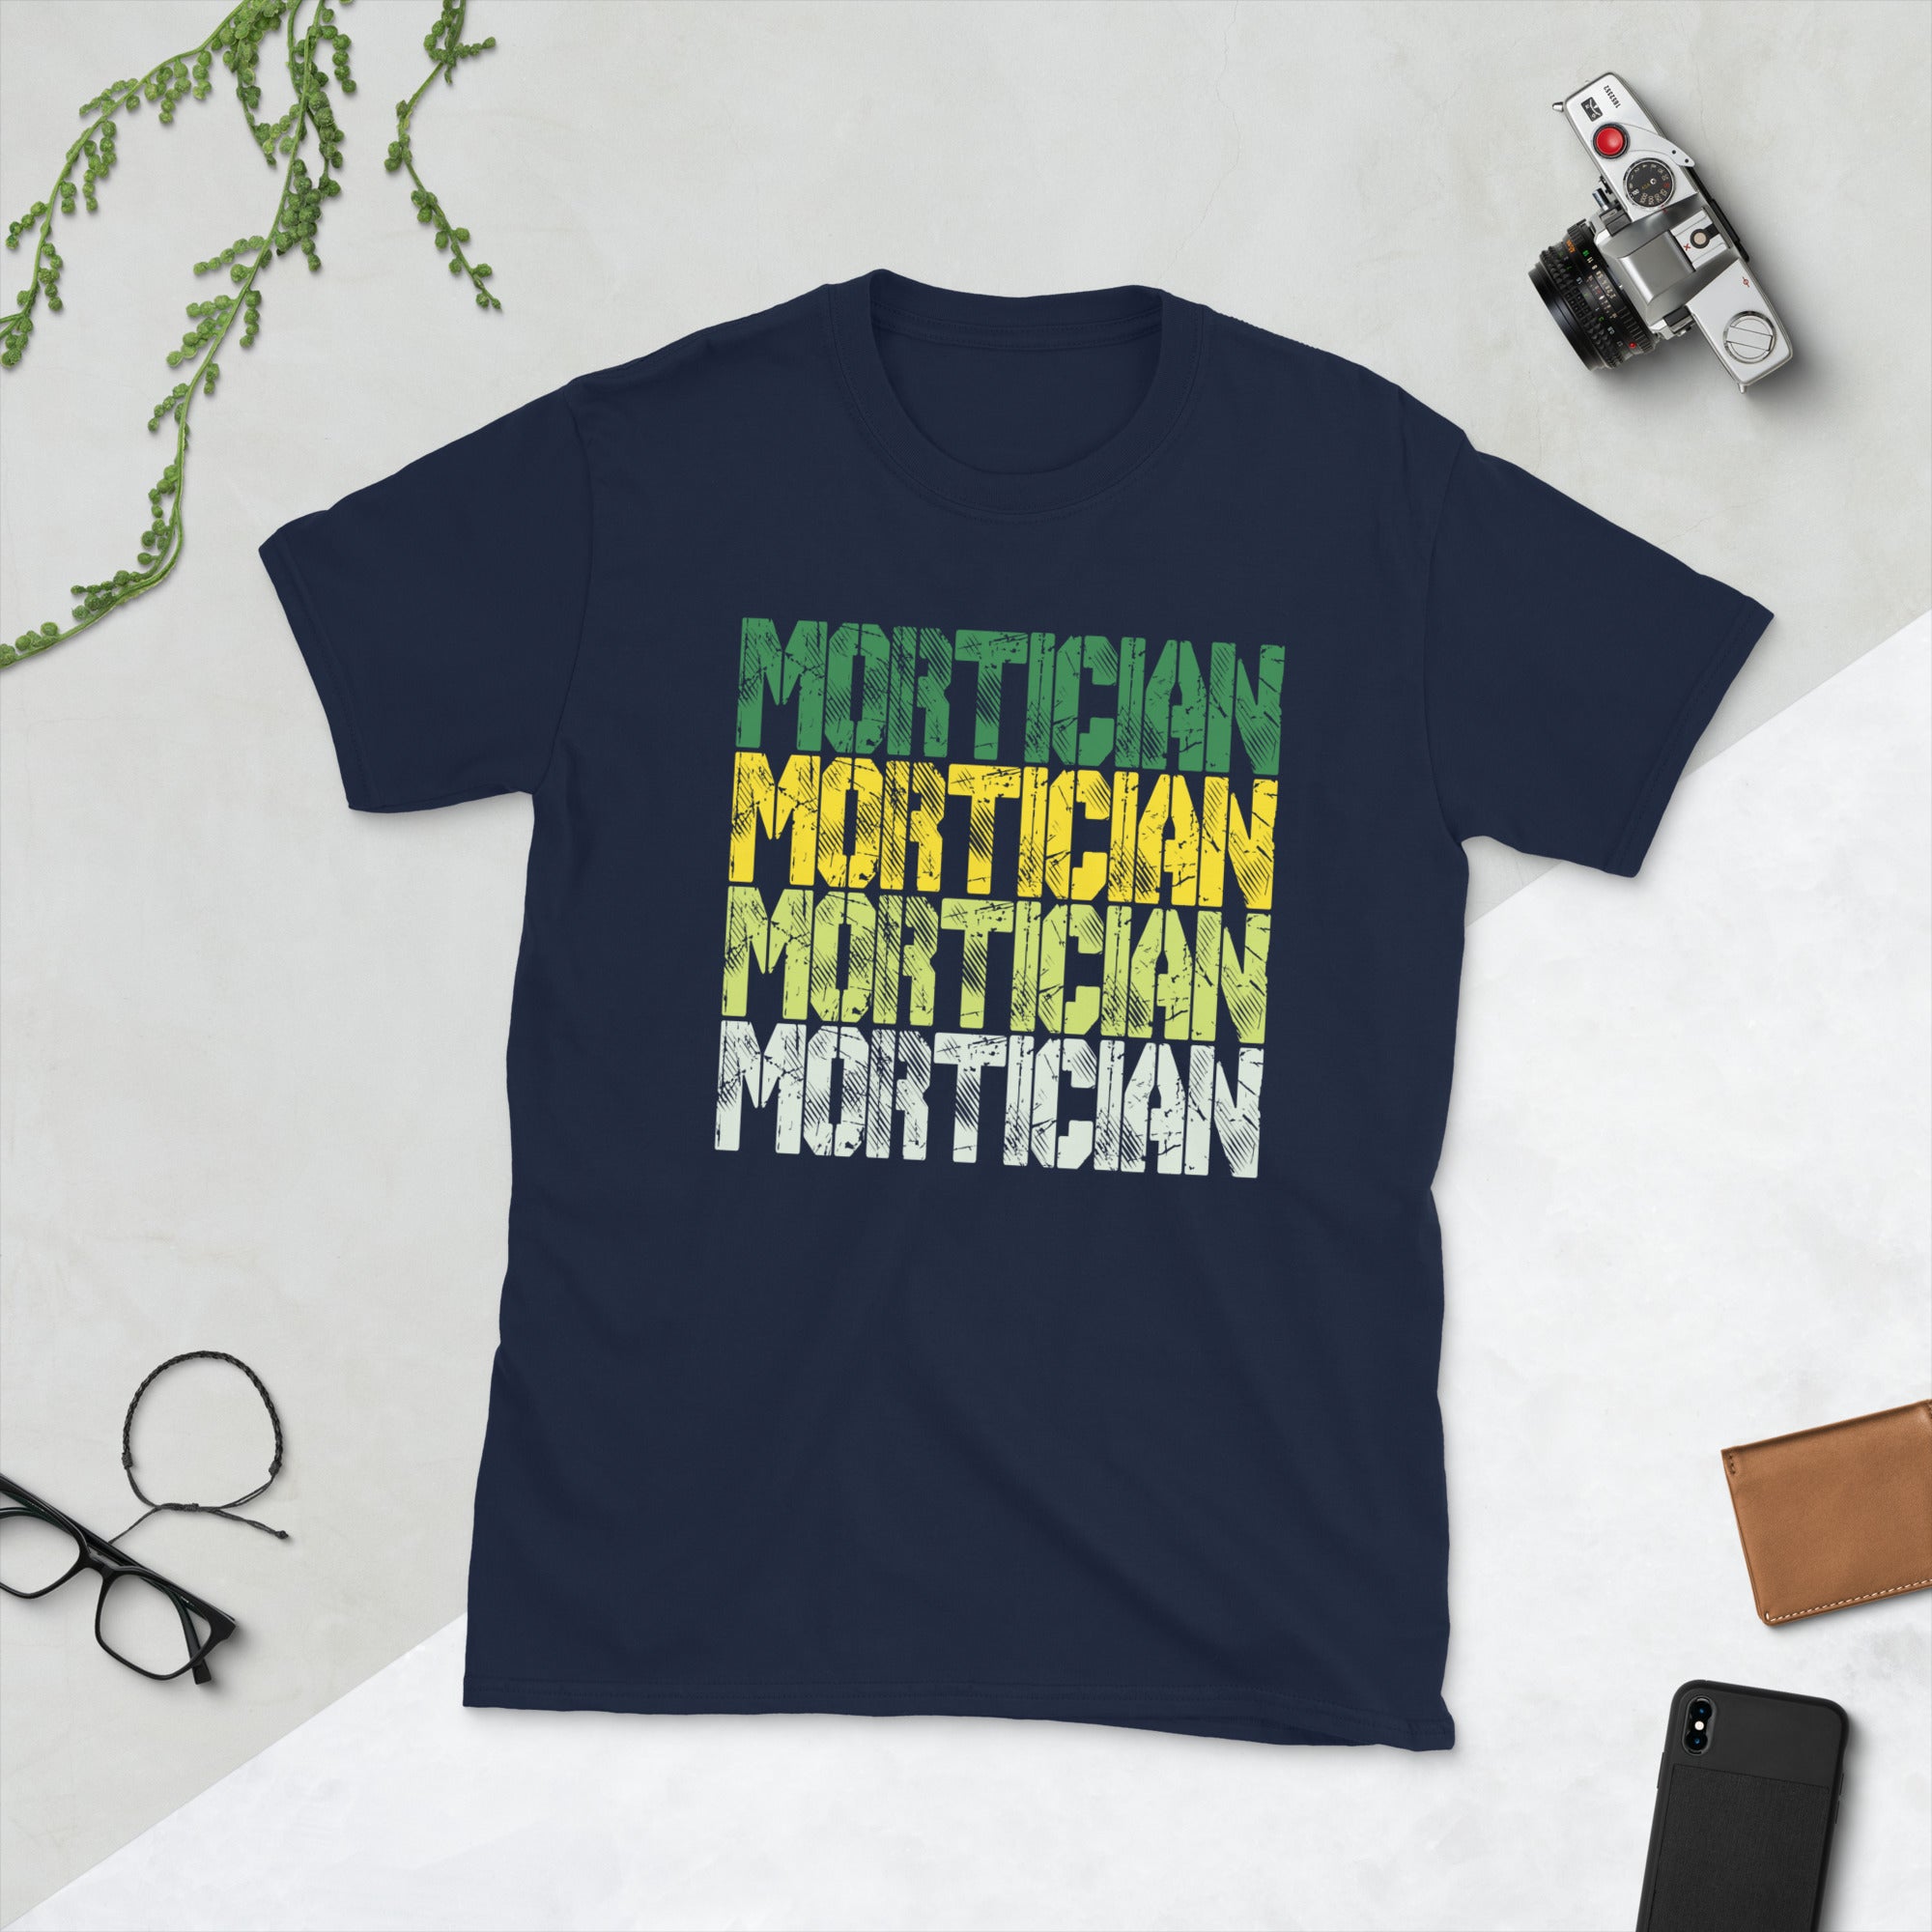 Mortuary Gifts, Mortuary TShirt, Mortician Gift, Mortician Shirt, Funeral Director Gift, Funeral Director Shirt, Embalmer T-Shirt, Mortician